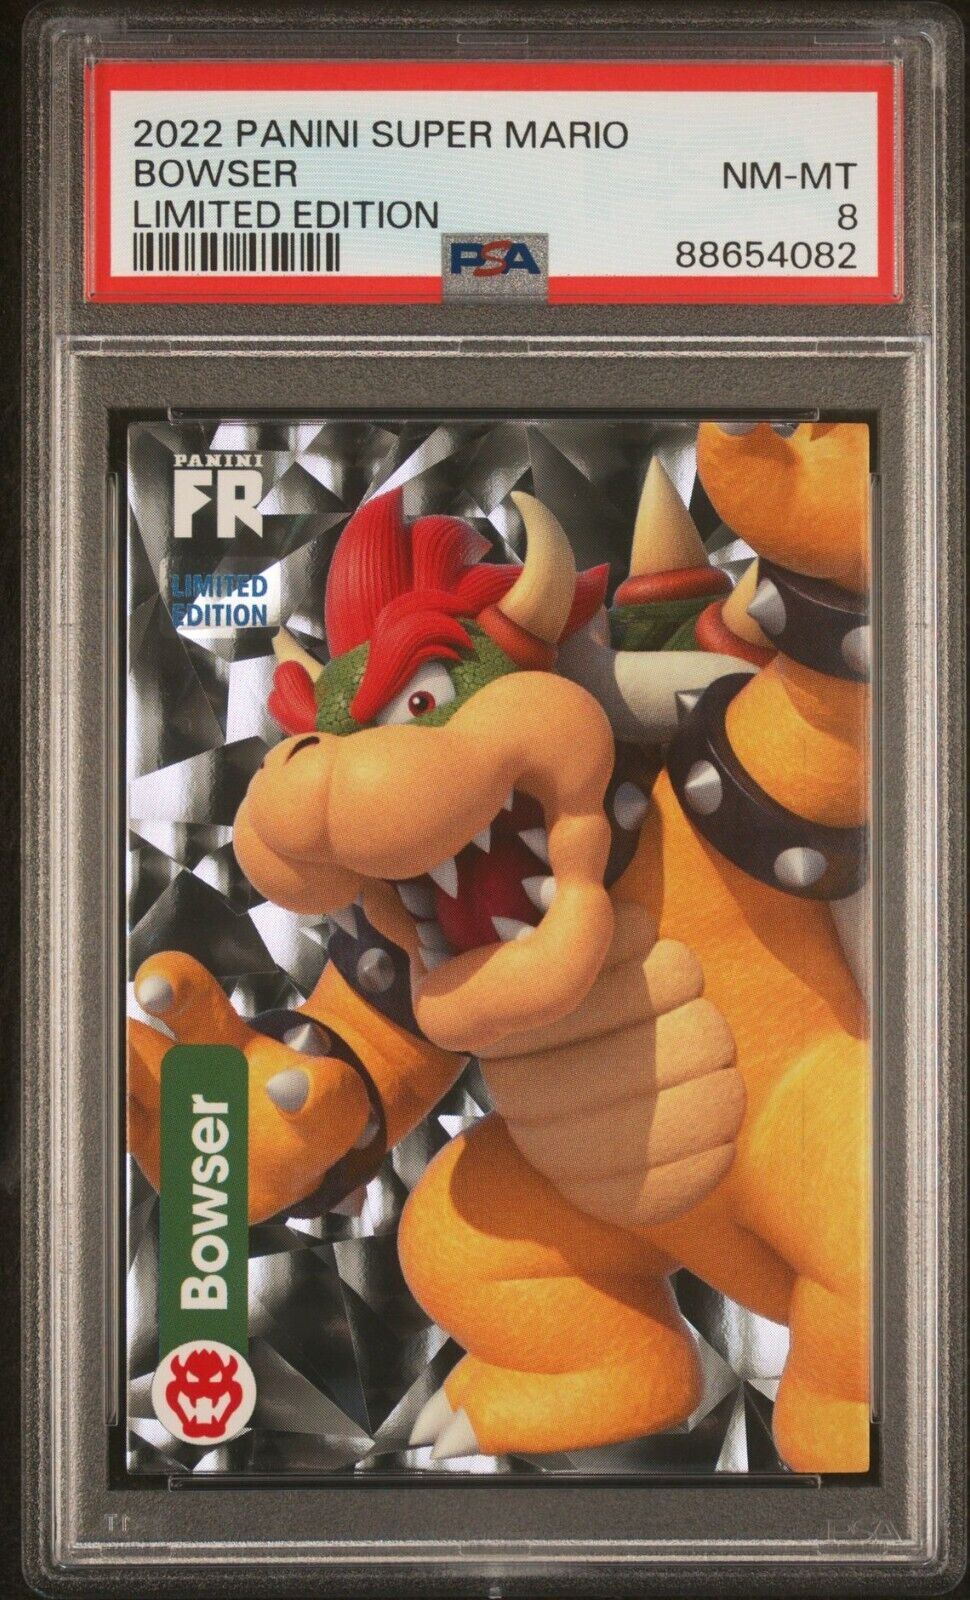 2022 Panini Super Mario Limited Edition Fragmented Reality Bowser PSA 8